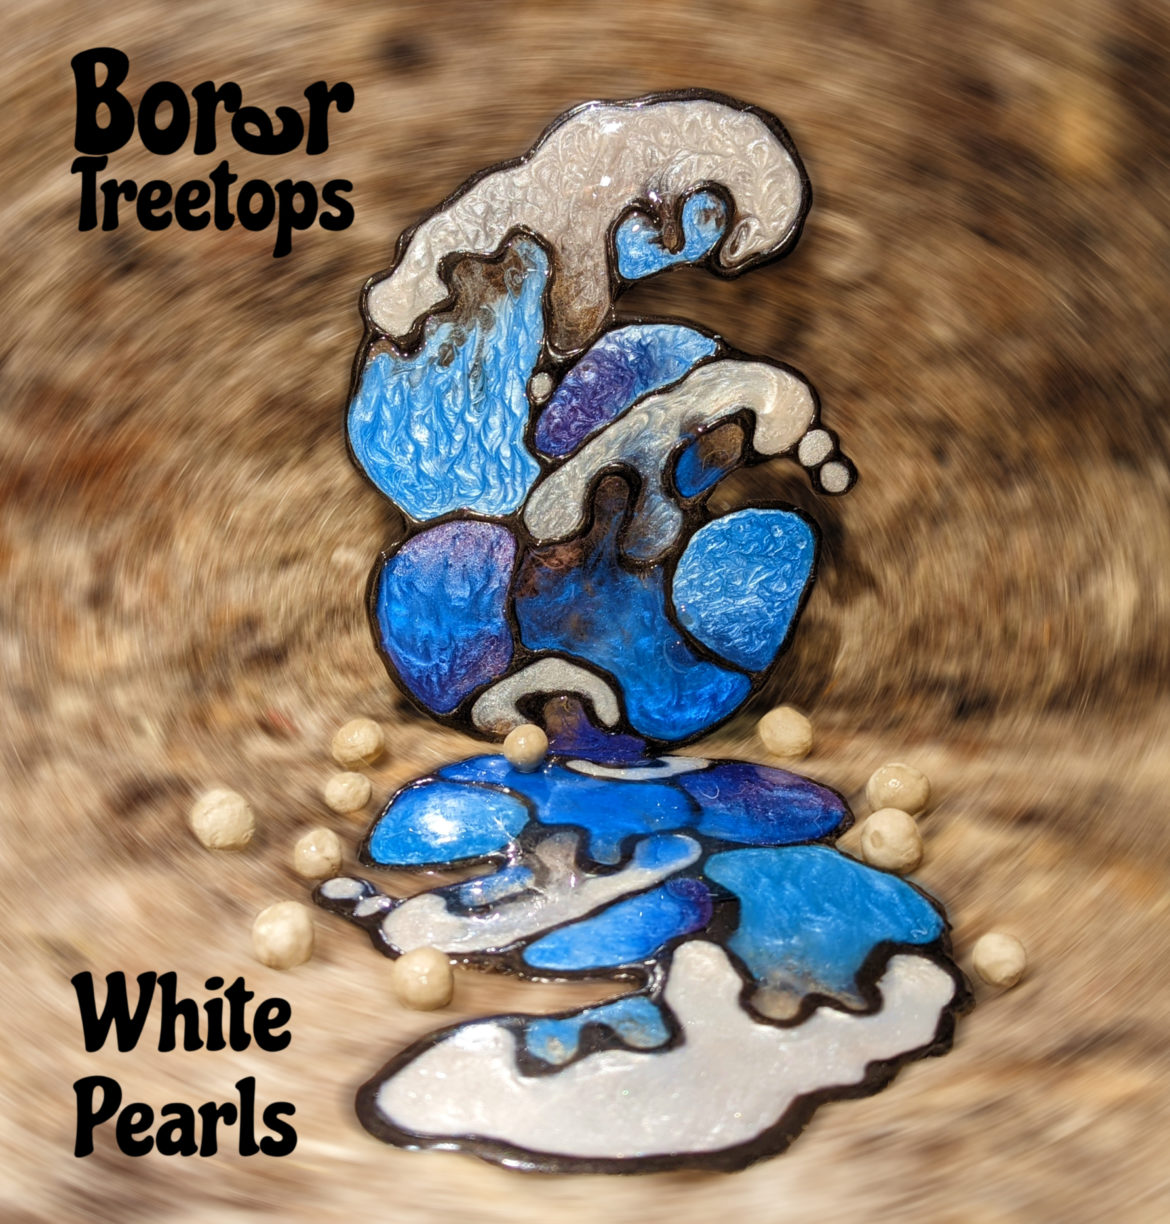 Borer Treetops Album ‘White Pearls’ Officially Released